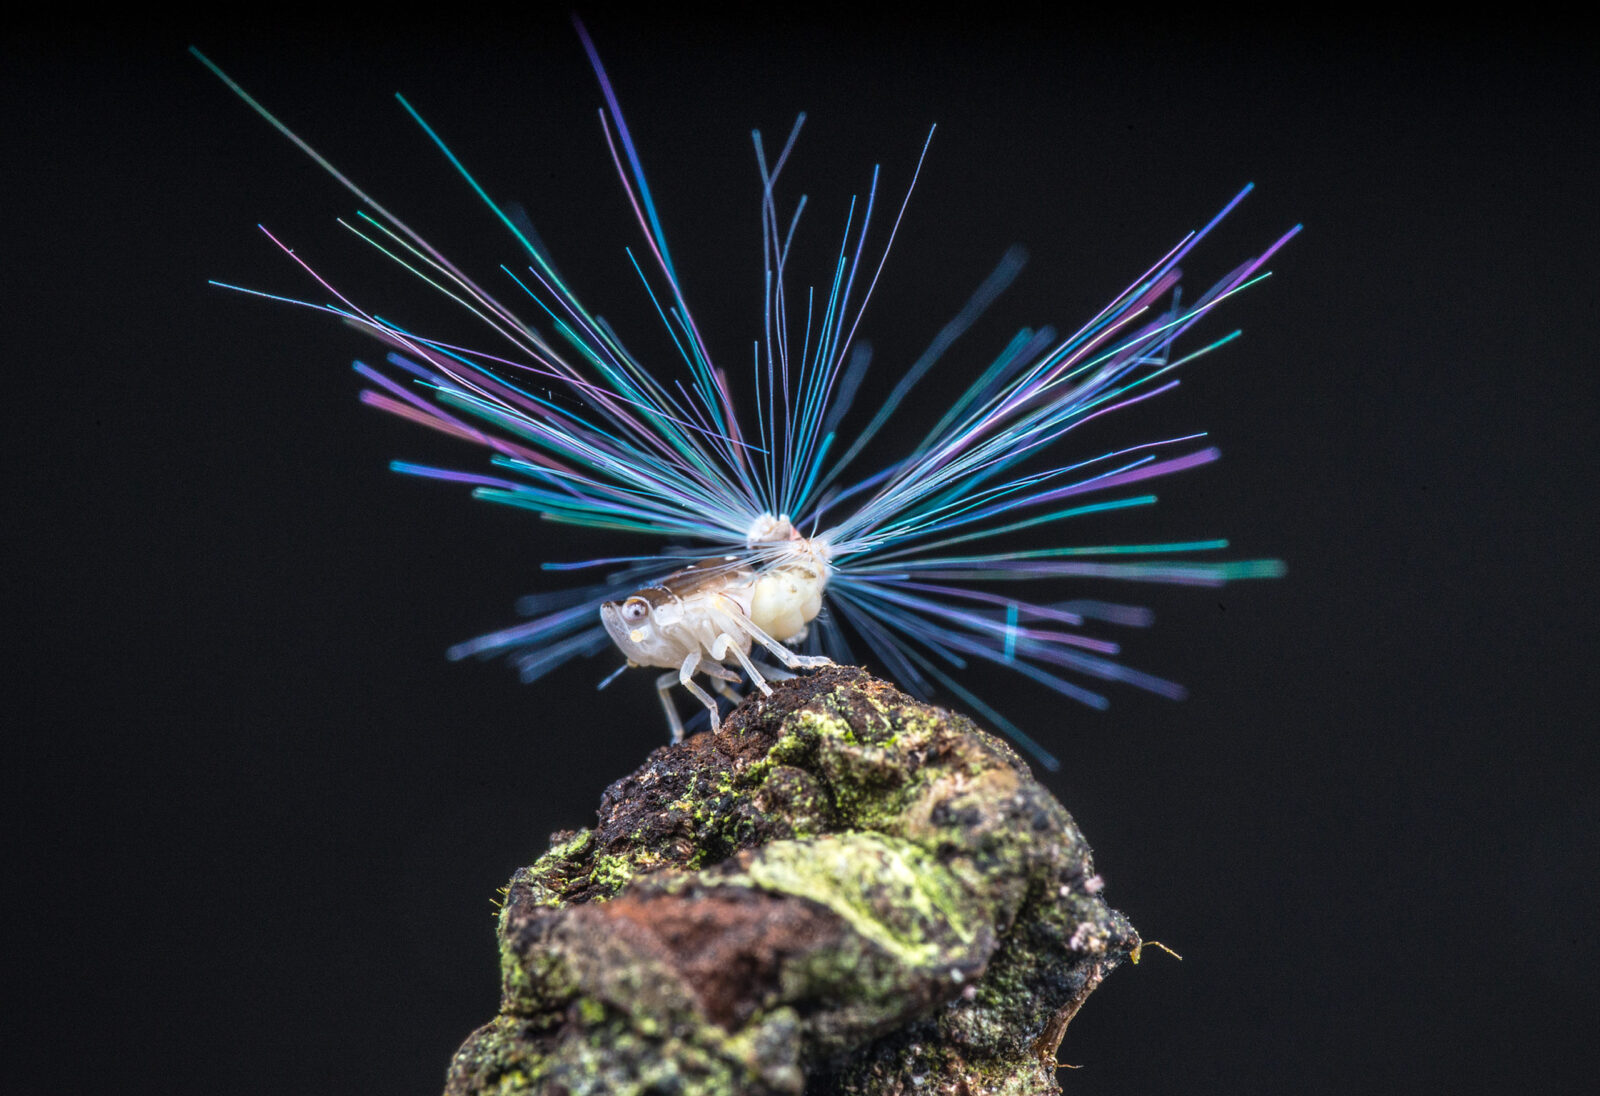 Planthopper nymph with the 'fibre optic' tail Credit Weixiang Lee